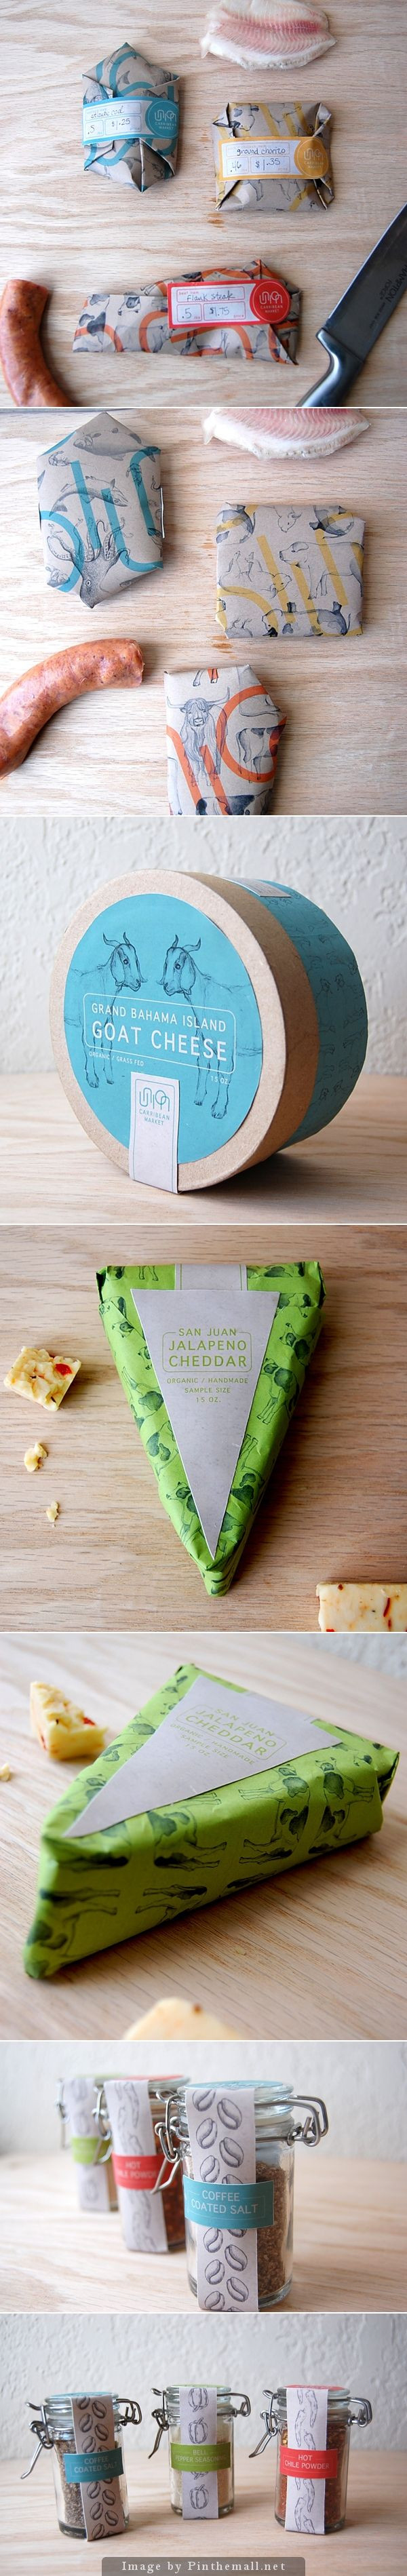 Union Market Deli - Brand identity applied to pack...